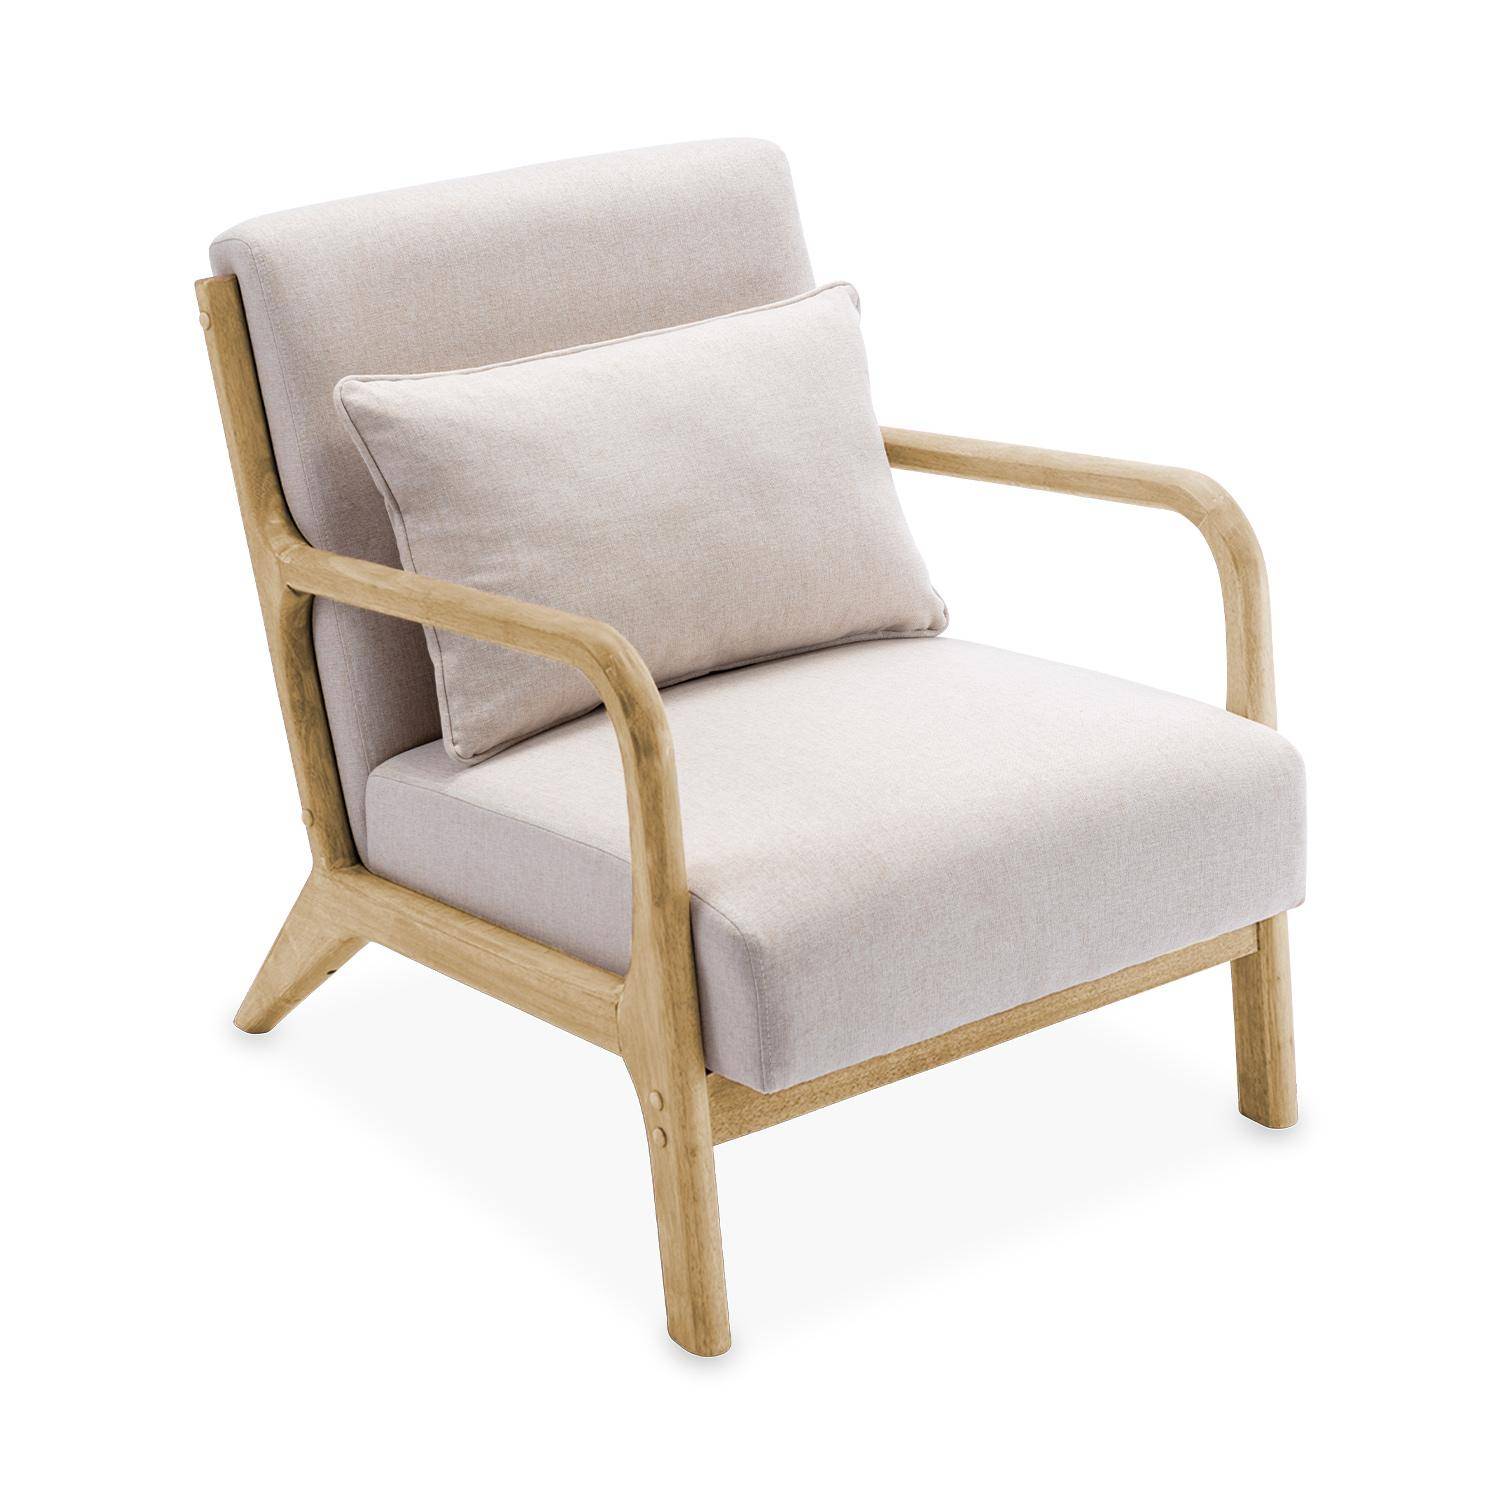 Wooden armchair with scandi-style compass legs and cushion - Lorens - Beige Photo4